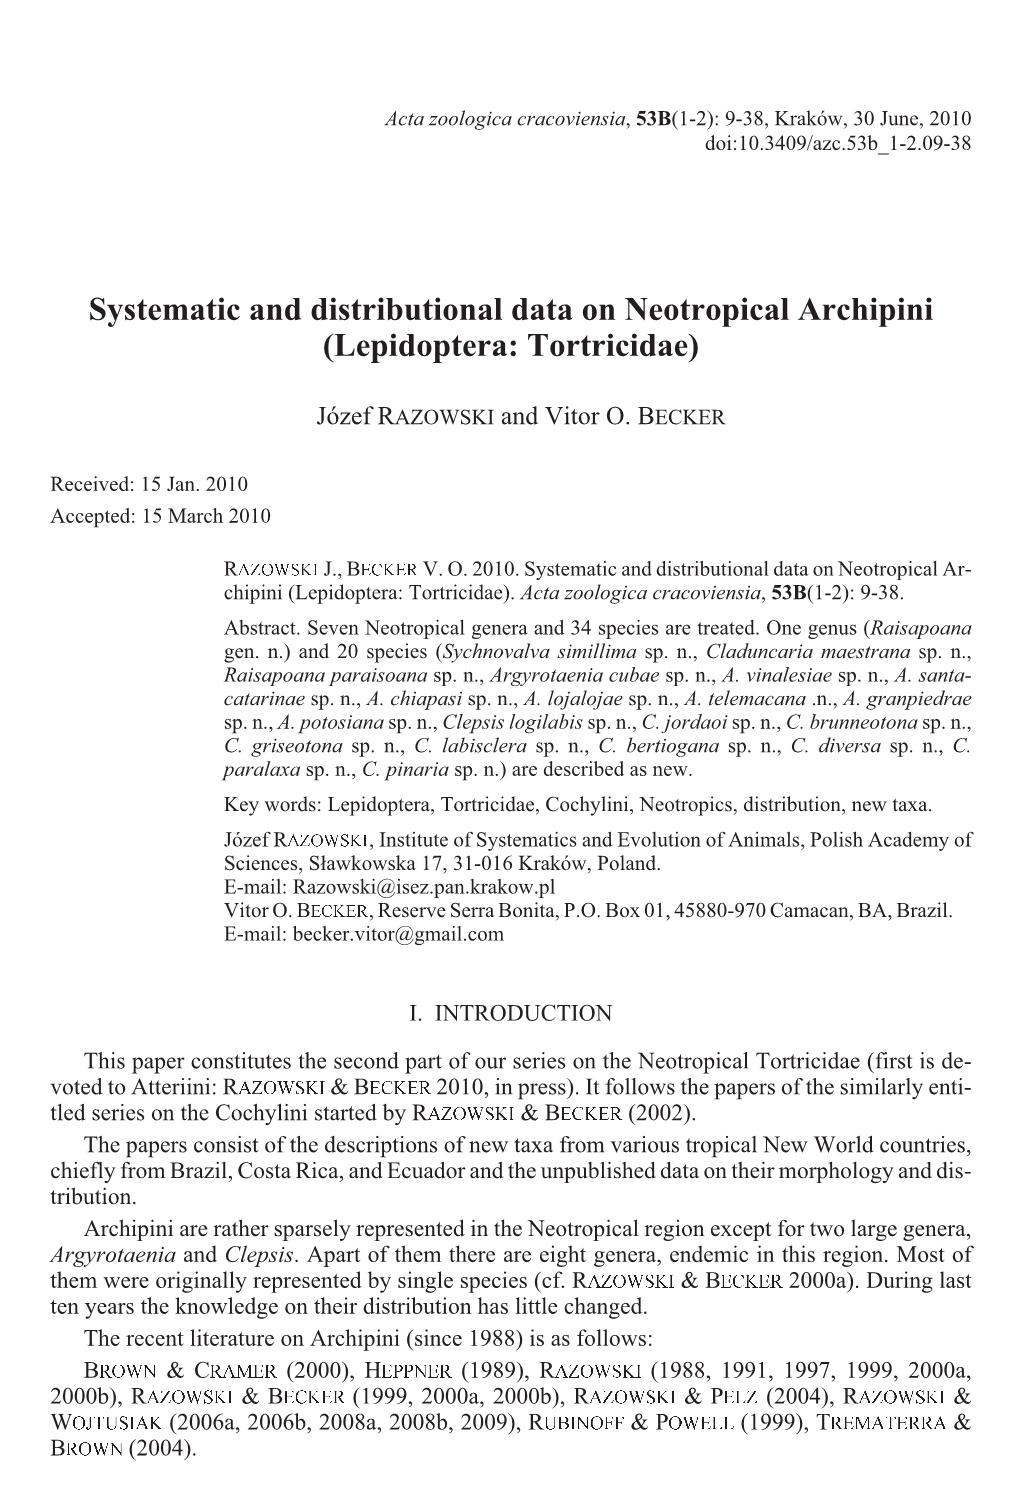 Systematic and Distributional Data on Neotropical Archipini (Lepidoptera